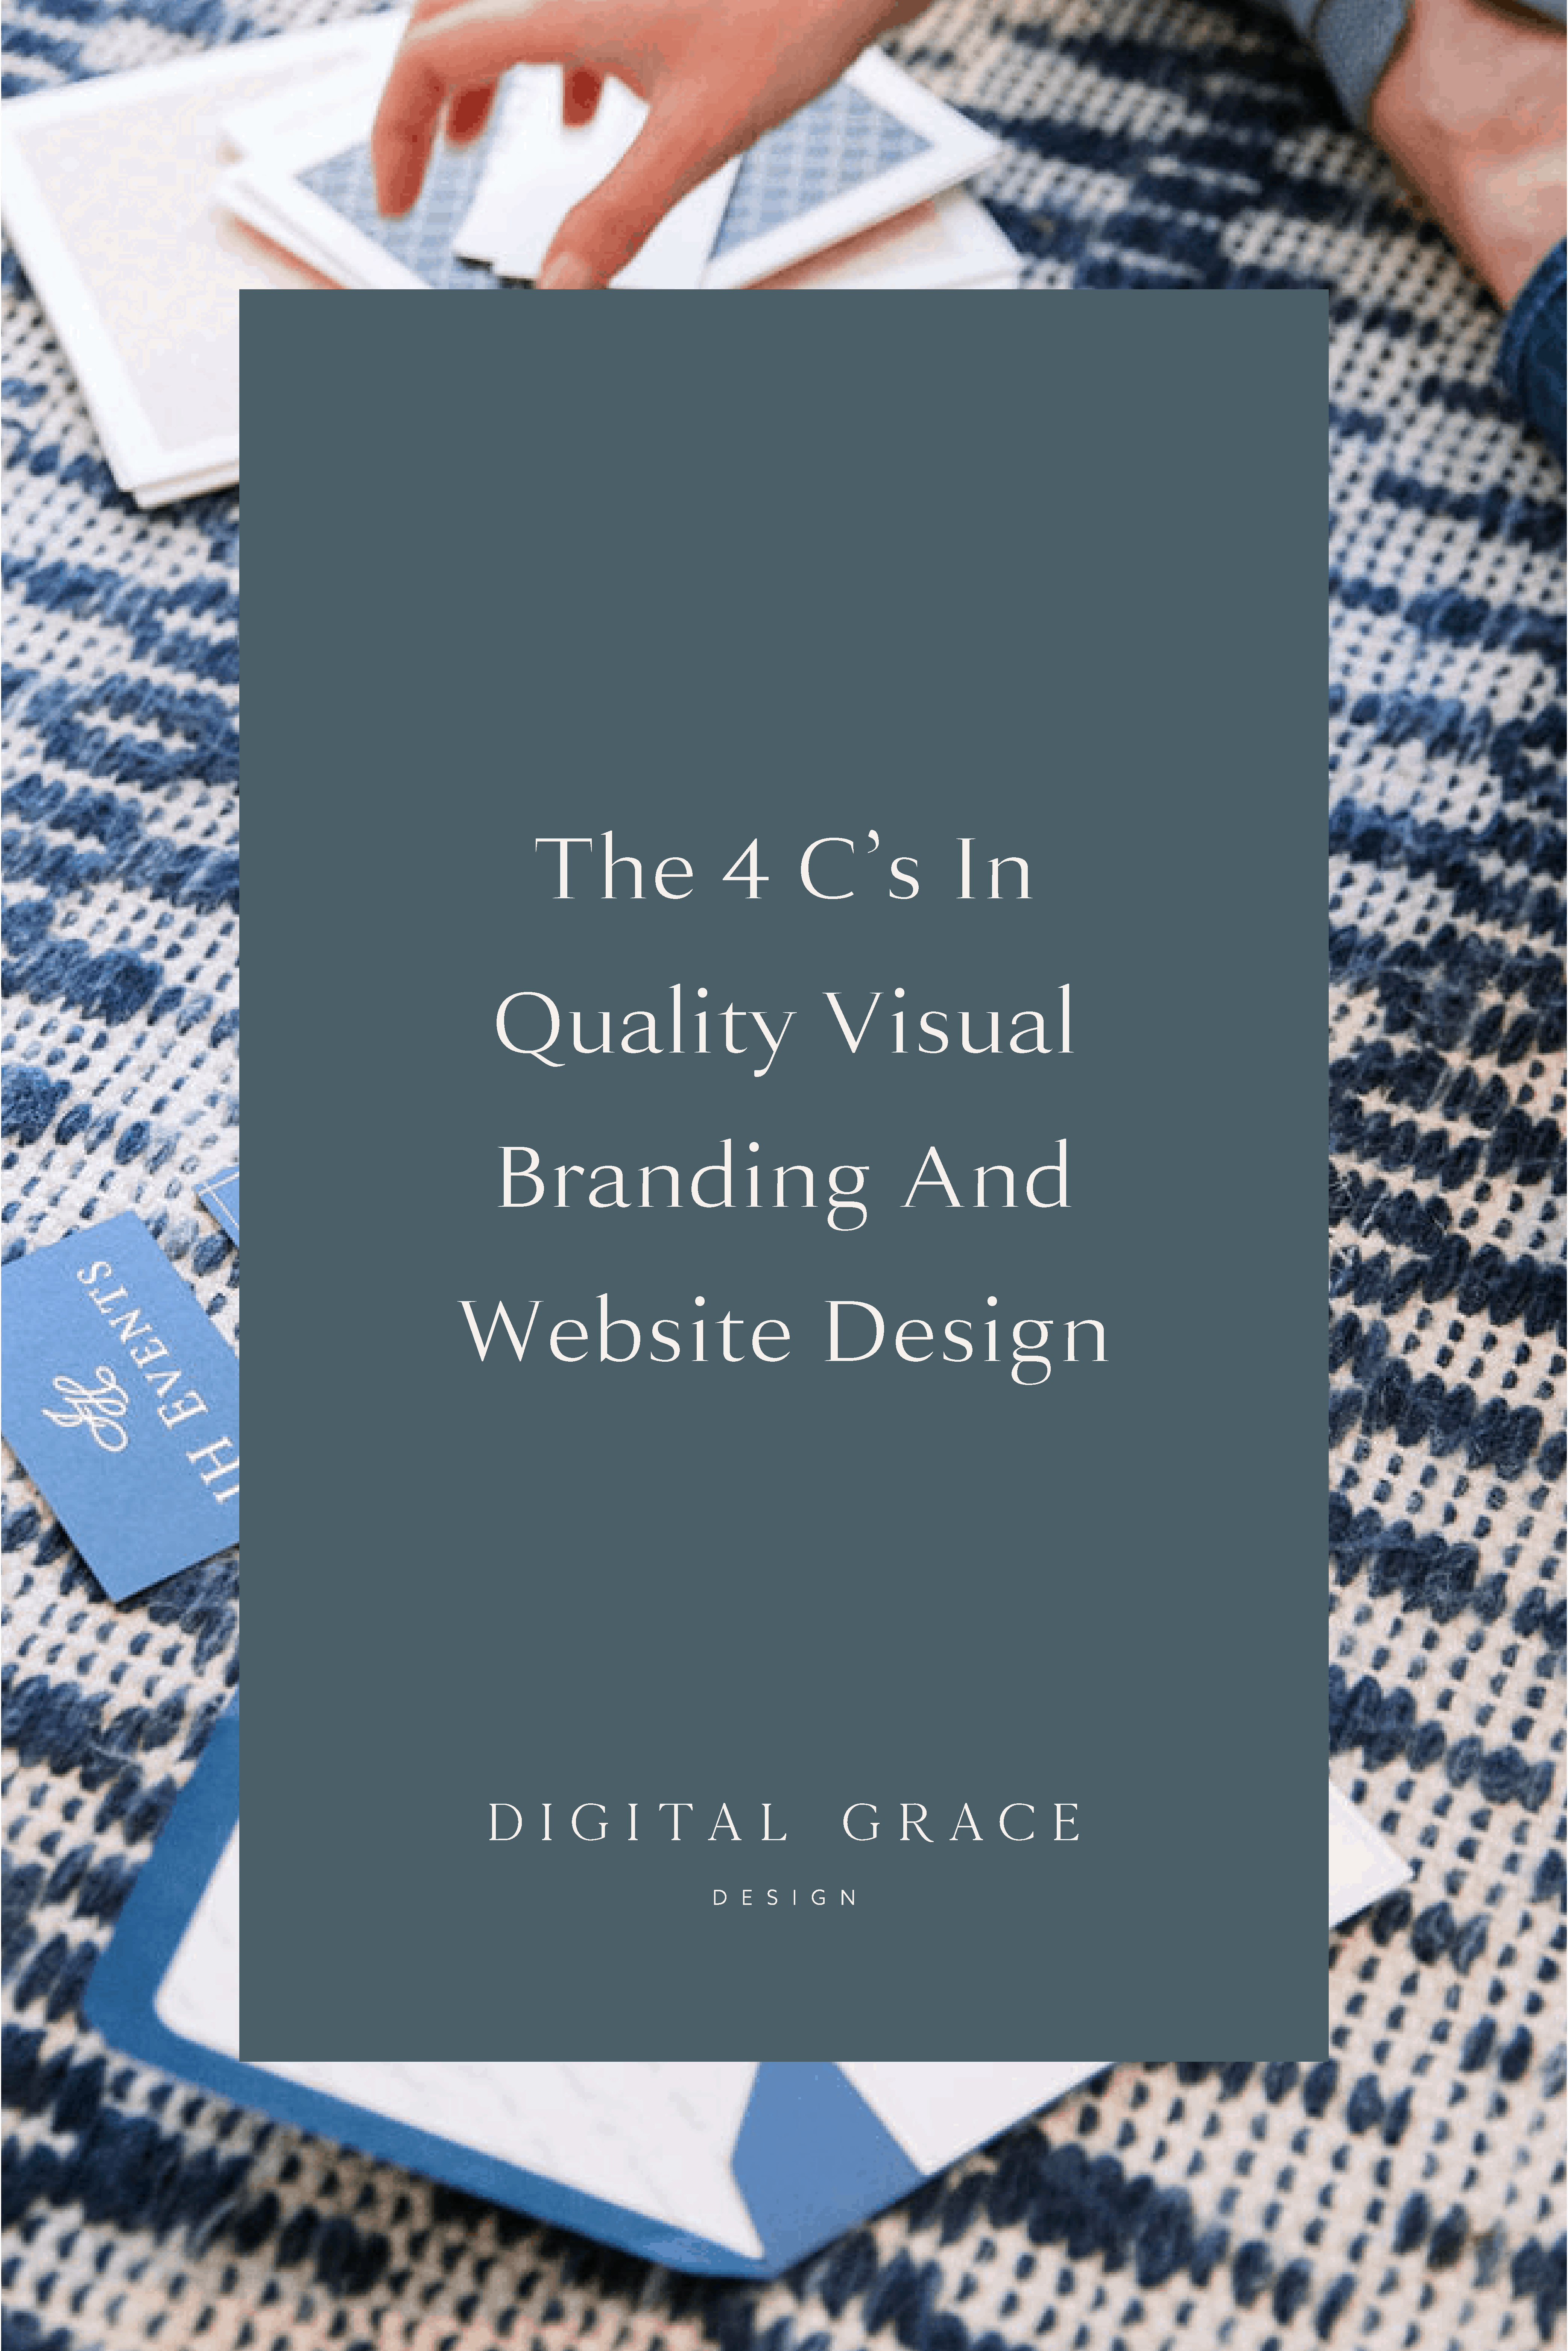 The 4 Cs in Quality Visual Branding and Website Design